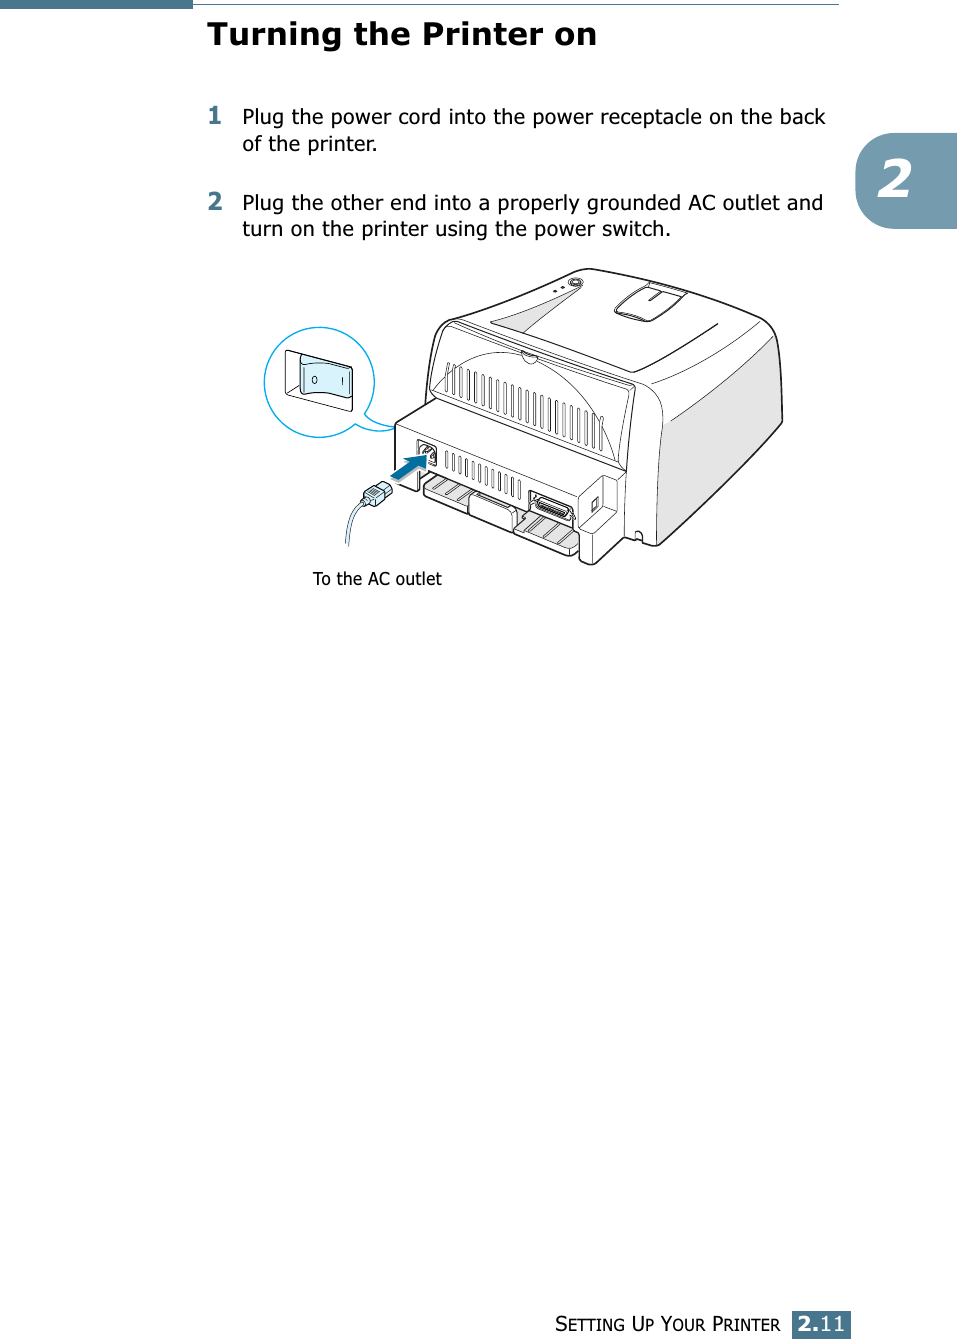 SETTING UP YOUR PRINTER2.112Turning the Printer on1Plug the power cord into the power receptacle on the back of the printer. 2Plug the other end into a properly grounded AC outlet and turn on the printer using the power switch. To the AC outlet